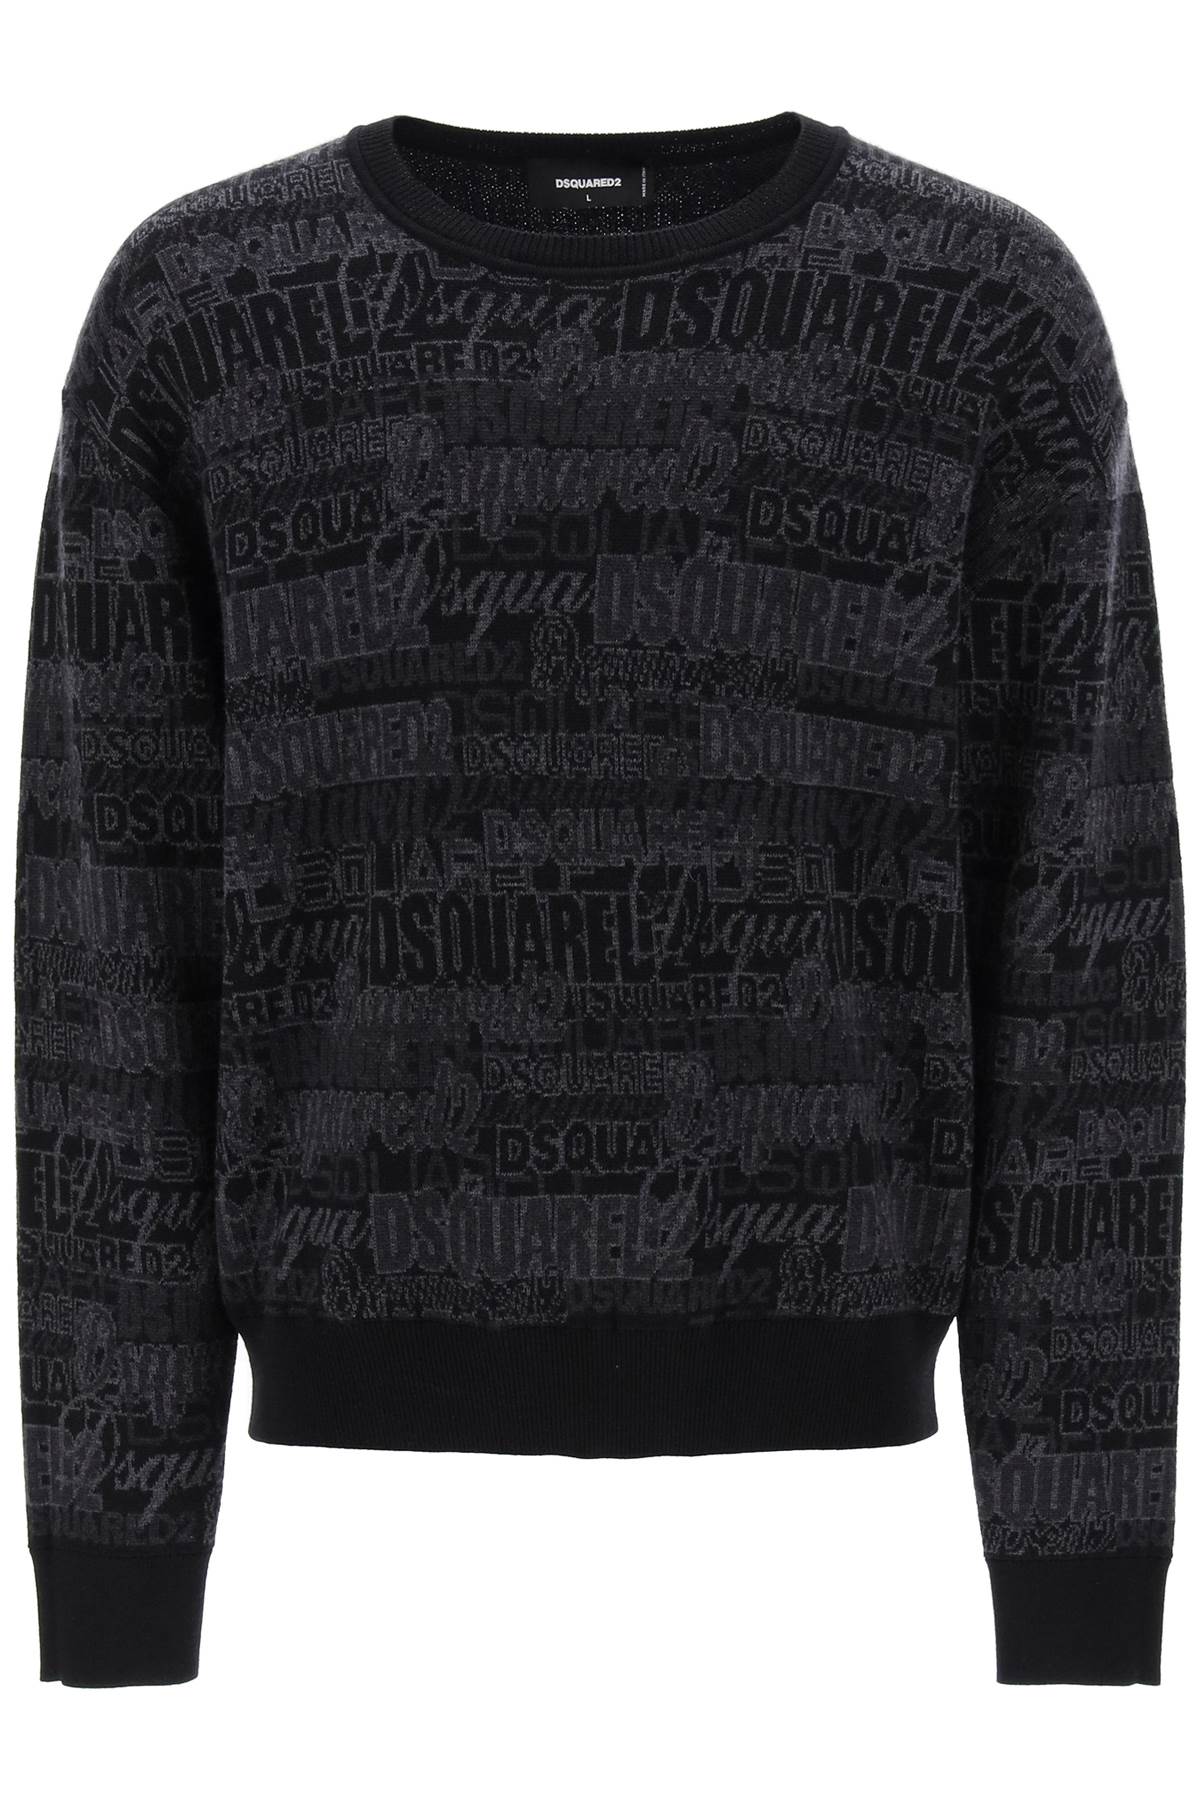 Dsquared2 wool sweater with logo lettering motif-0